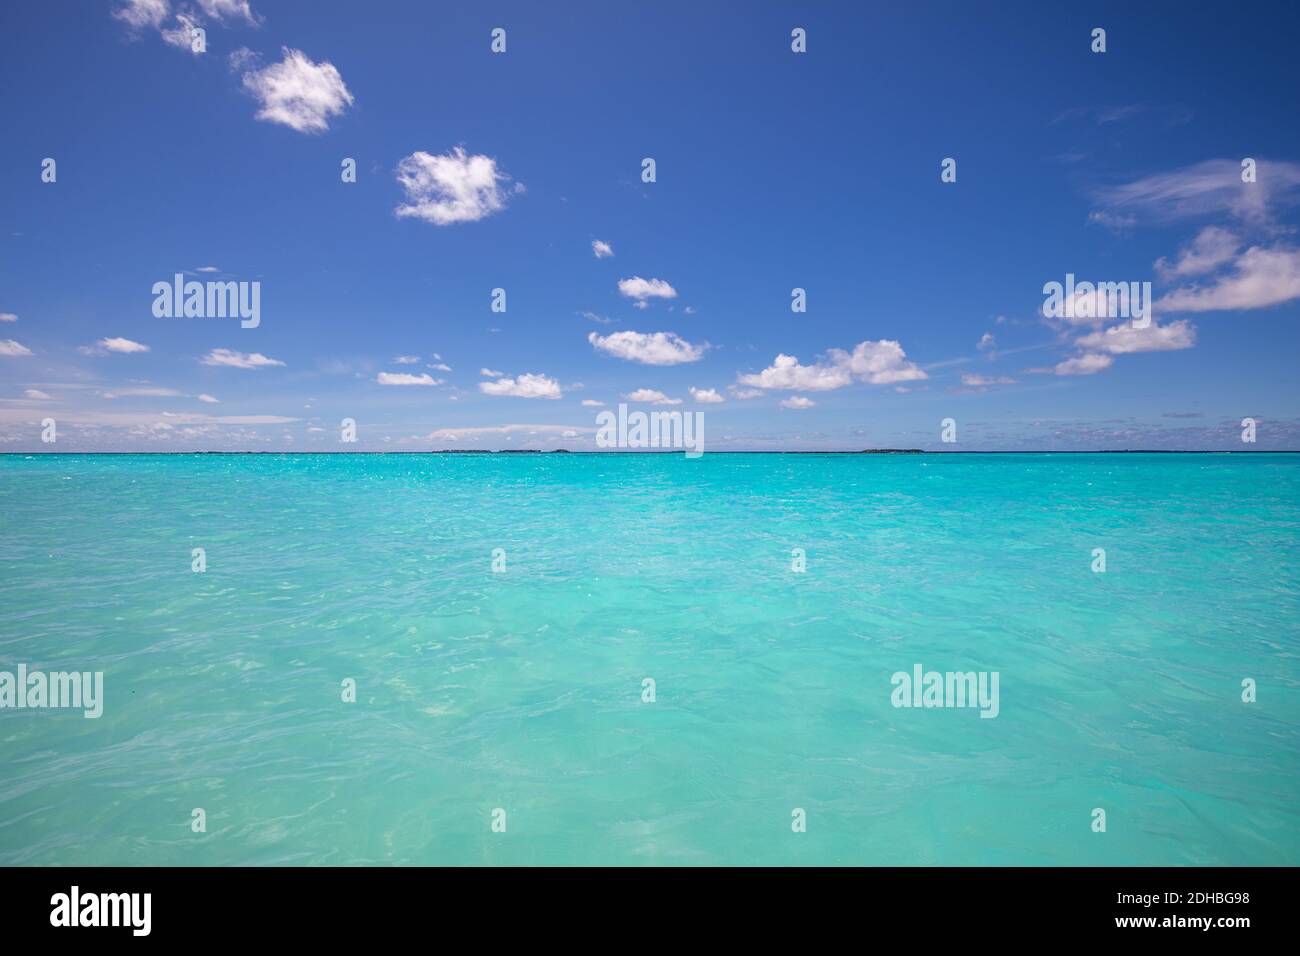 Perfect sky and water of ocean with endless view. Shades of blue, calm relaxing seascape and cloudy blue sky. Dream nature ecology concept, natural Stock Photo